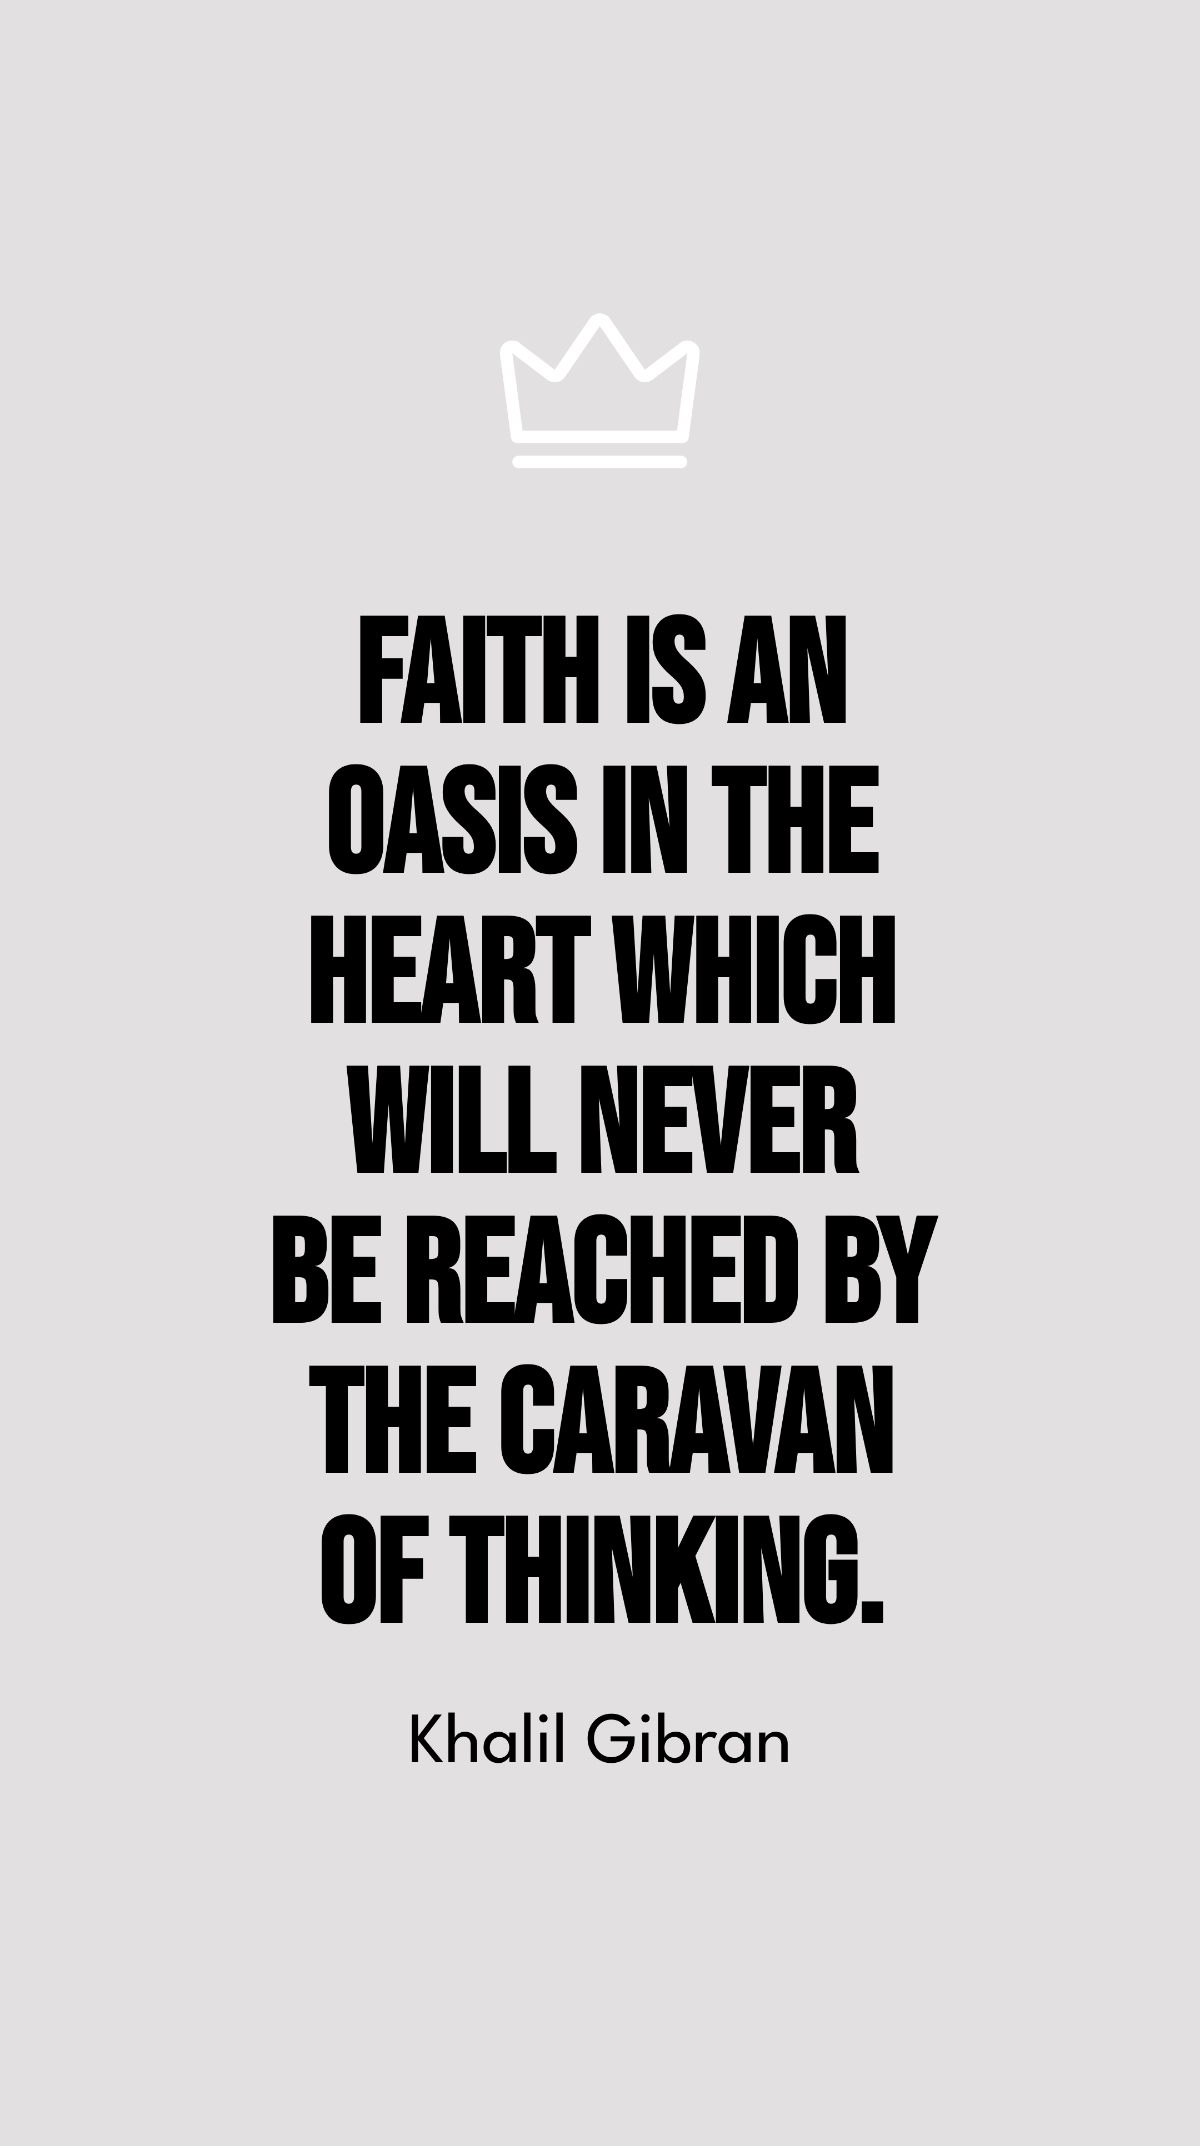 Khalil Gibran - Faith is an oasis in the heart which will never be reached by the caravan of thinking.